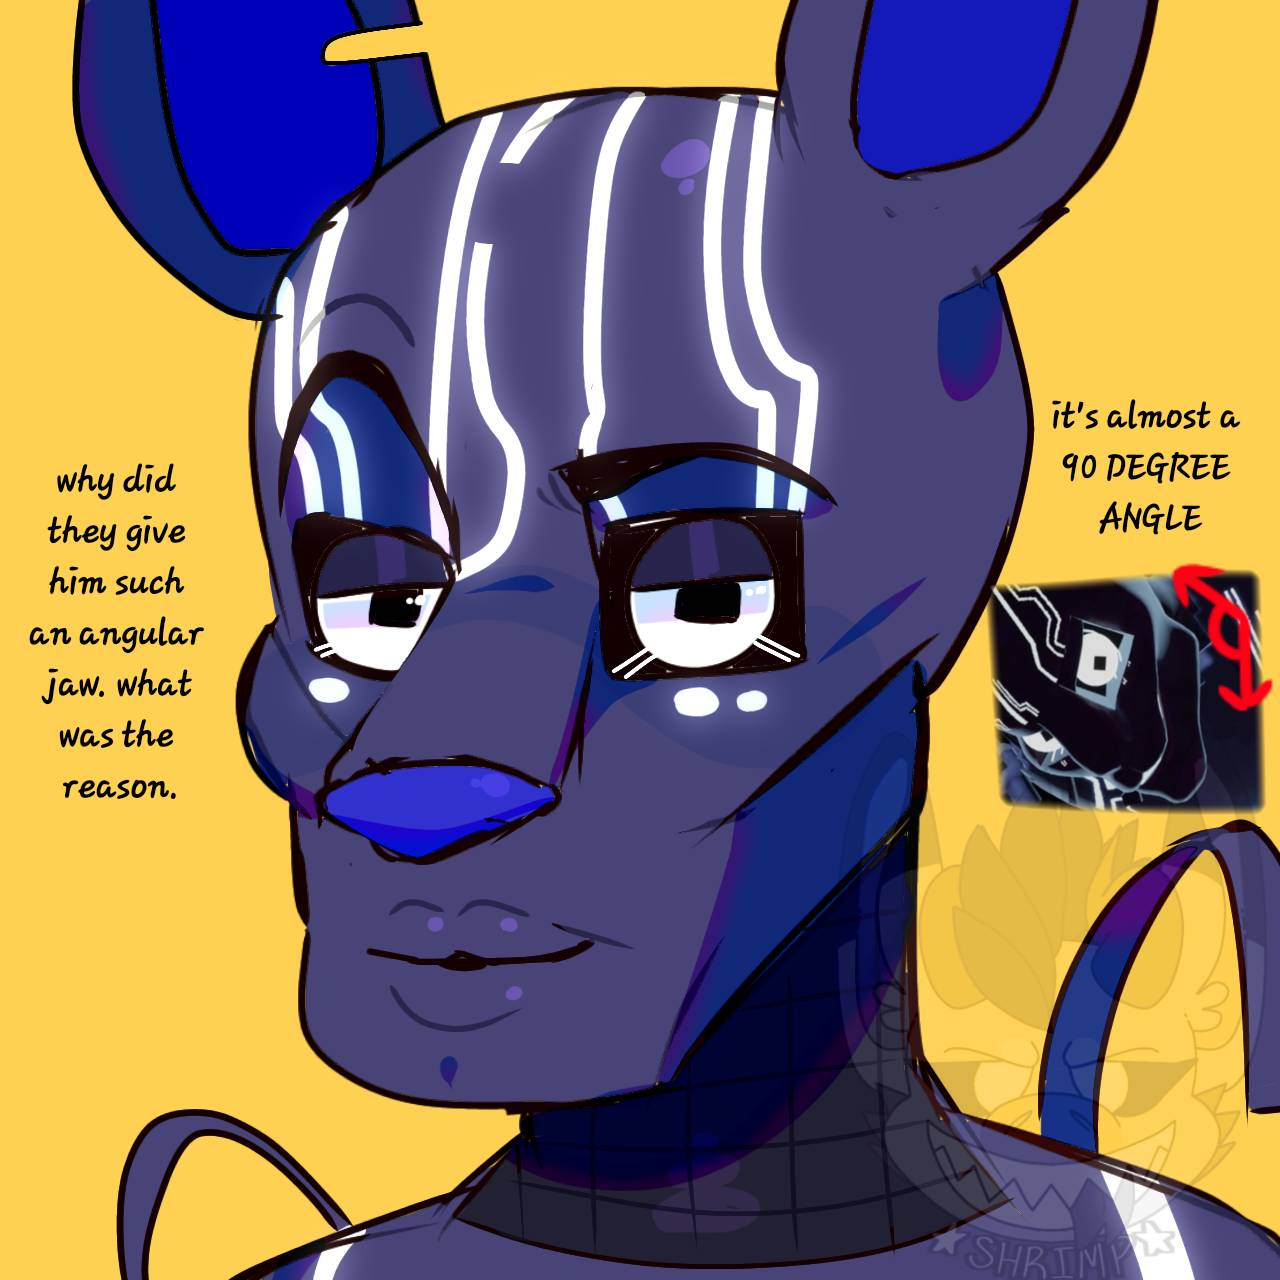 Mimicry (The Mimic)(FNAF SB: RUIN) by Squint-The-Dutchie on DeviantArt